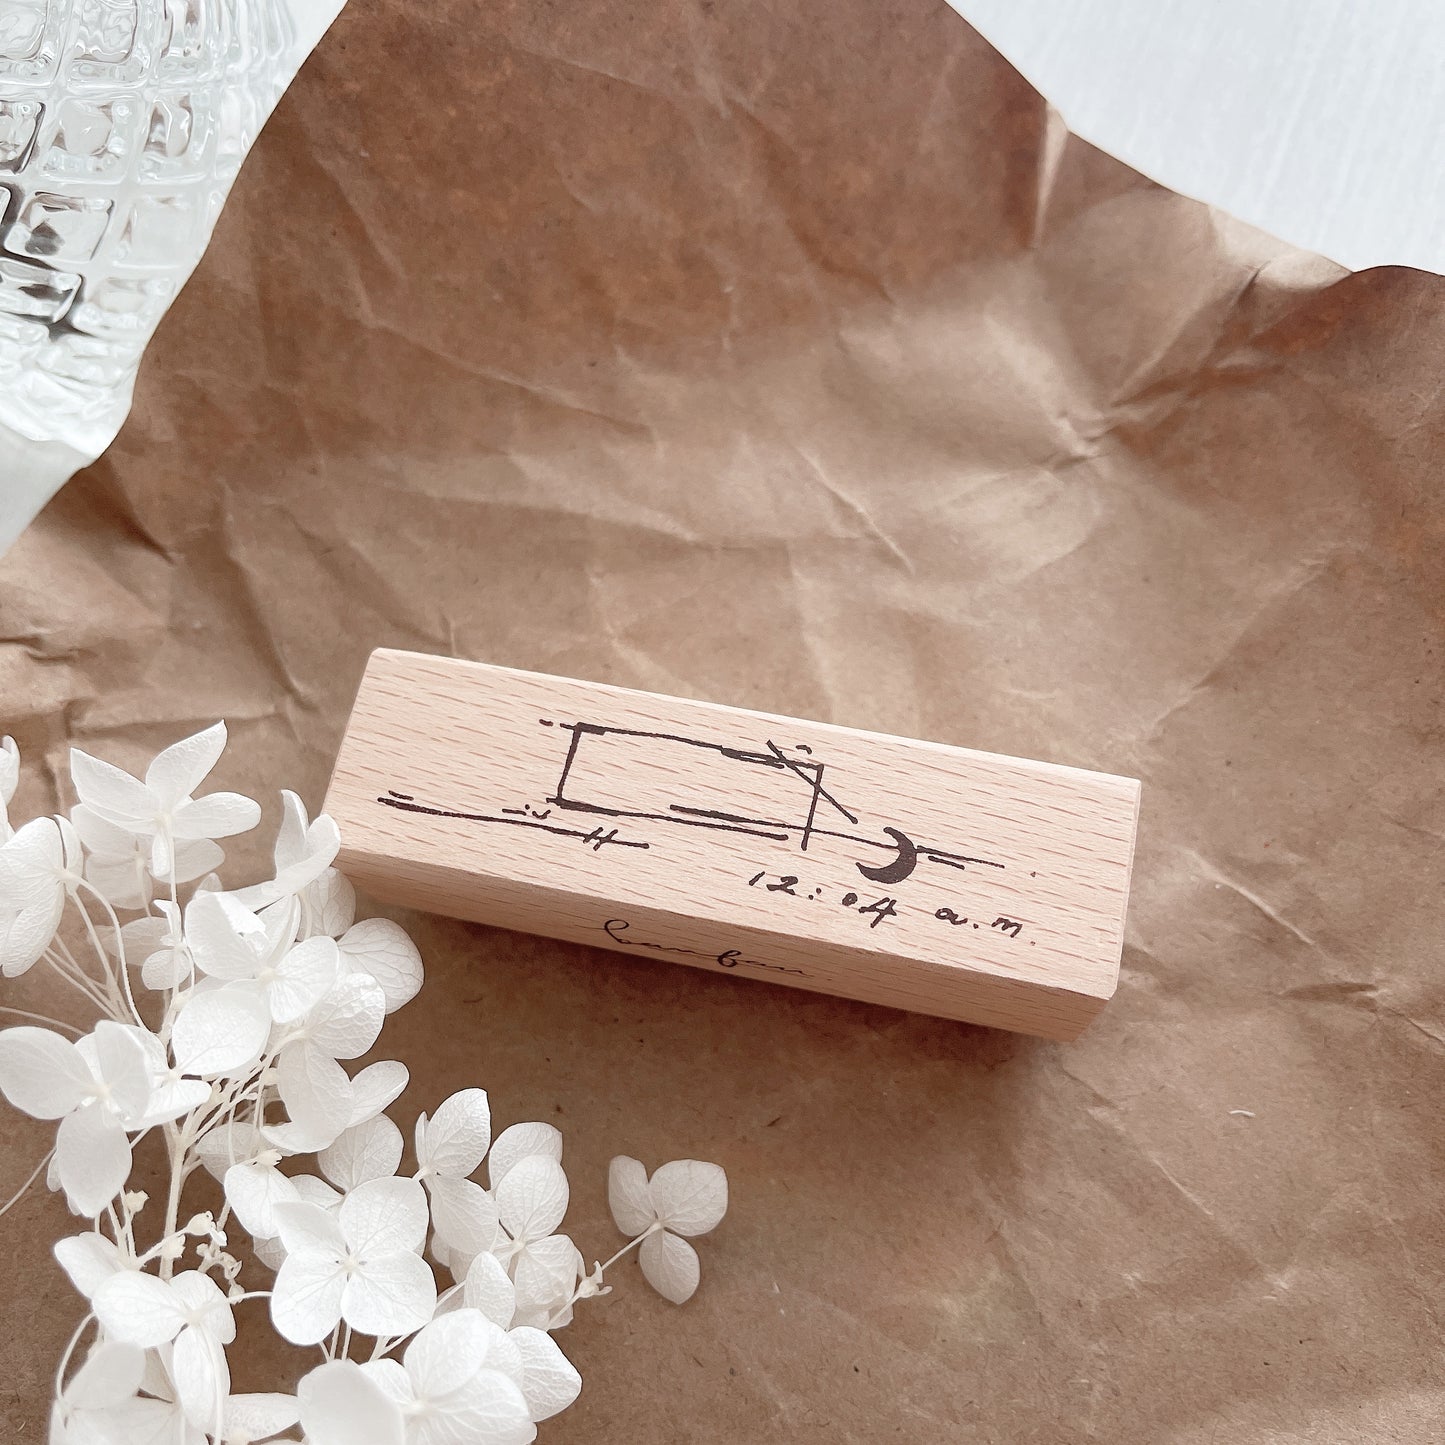 Banfan Out of Line Series (B) Rubber Stamps